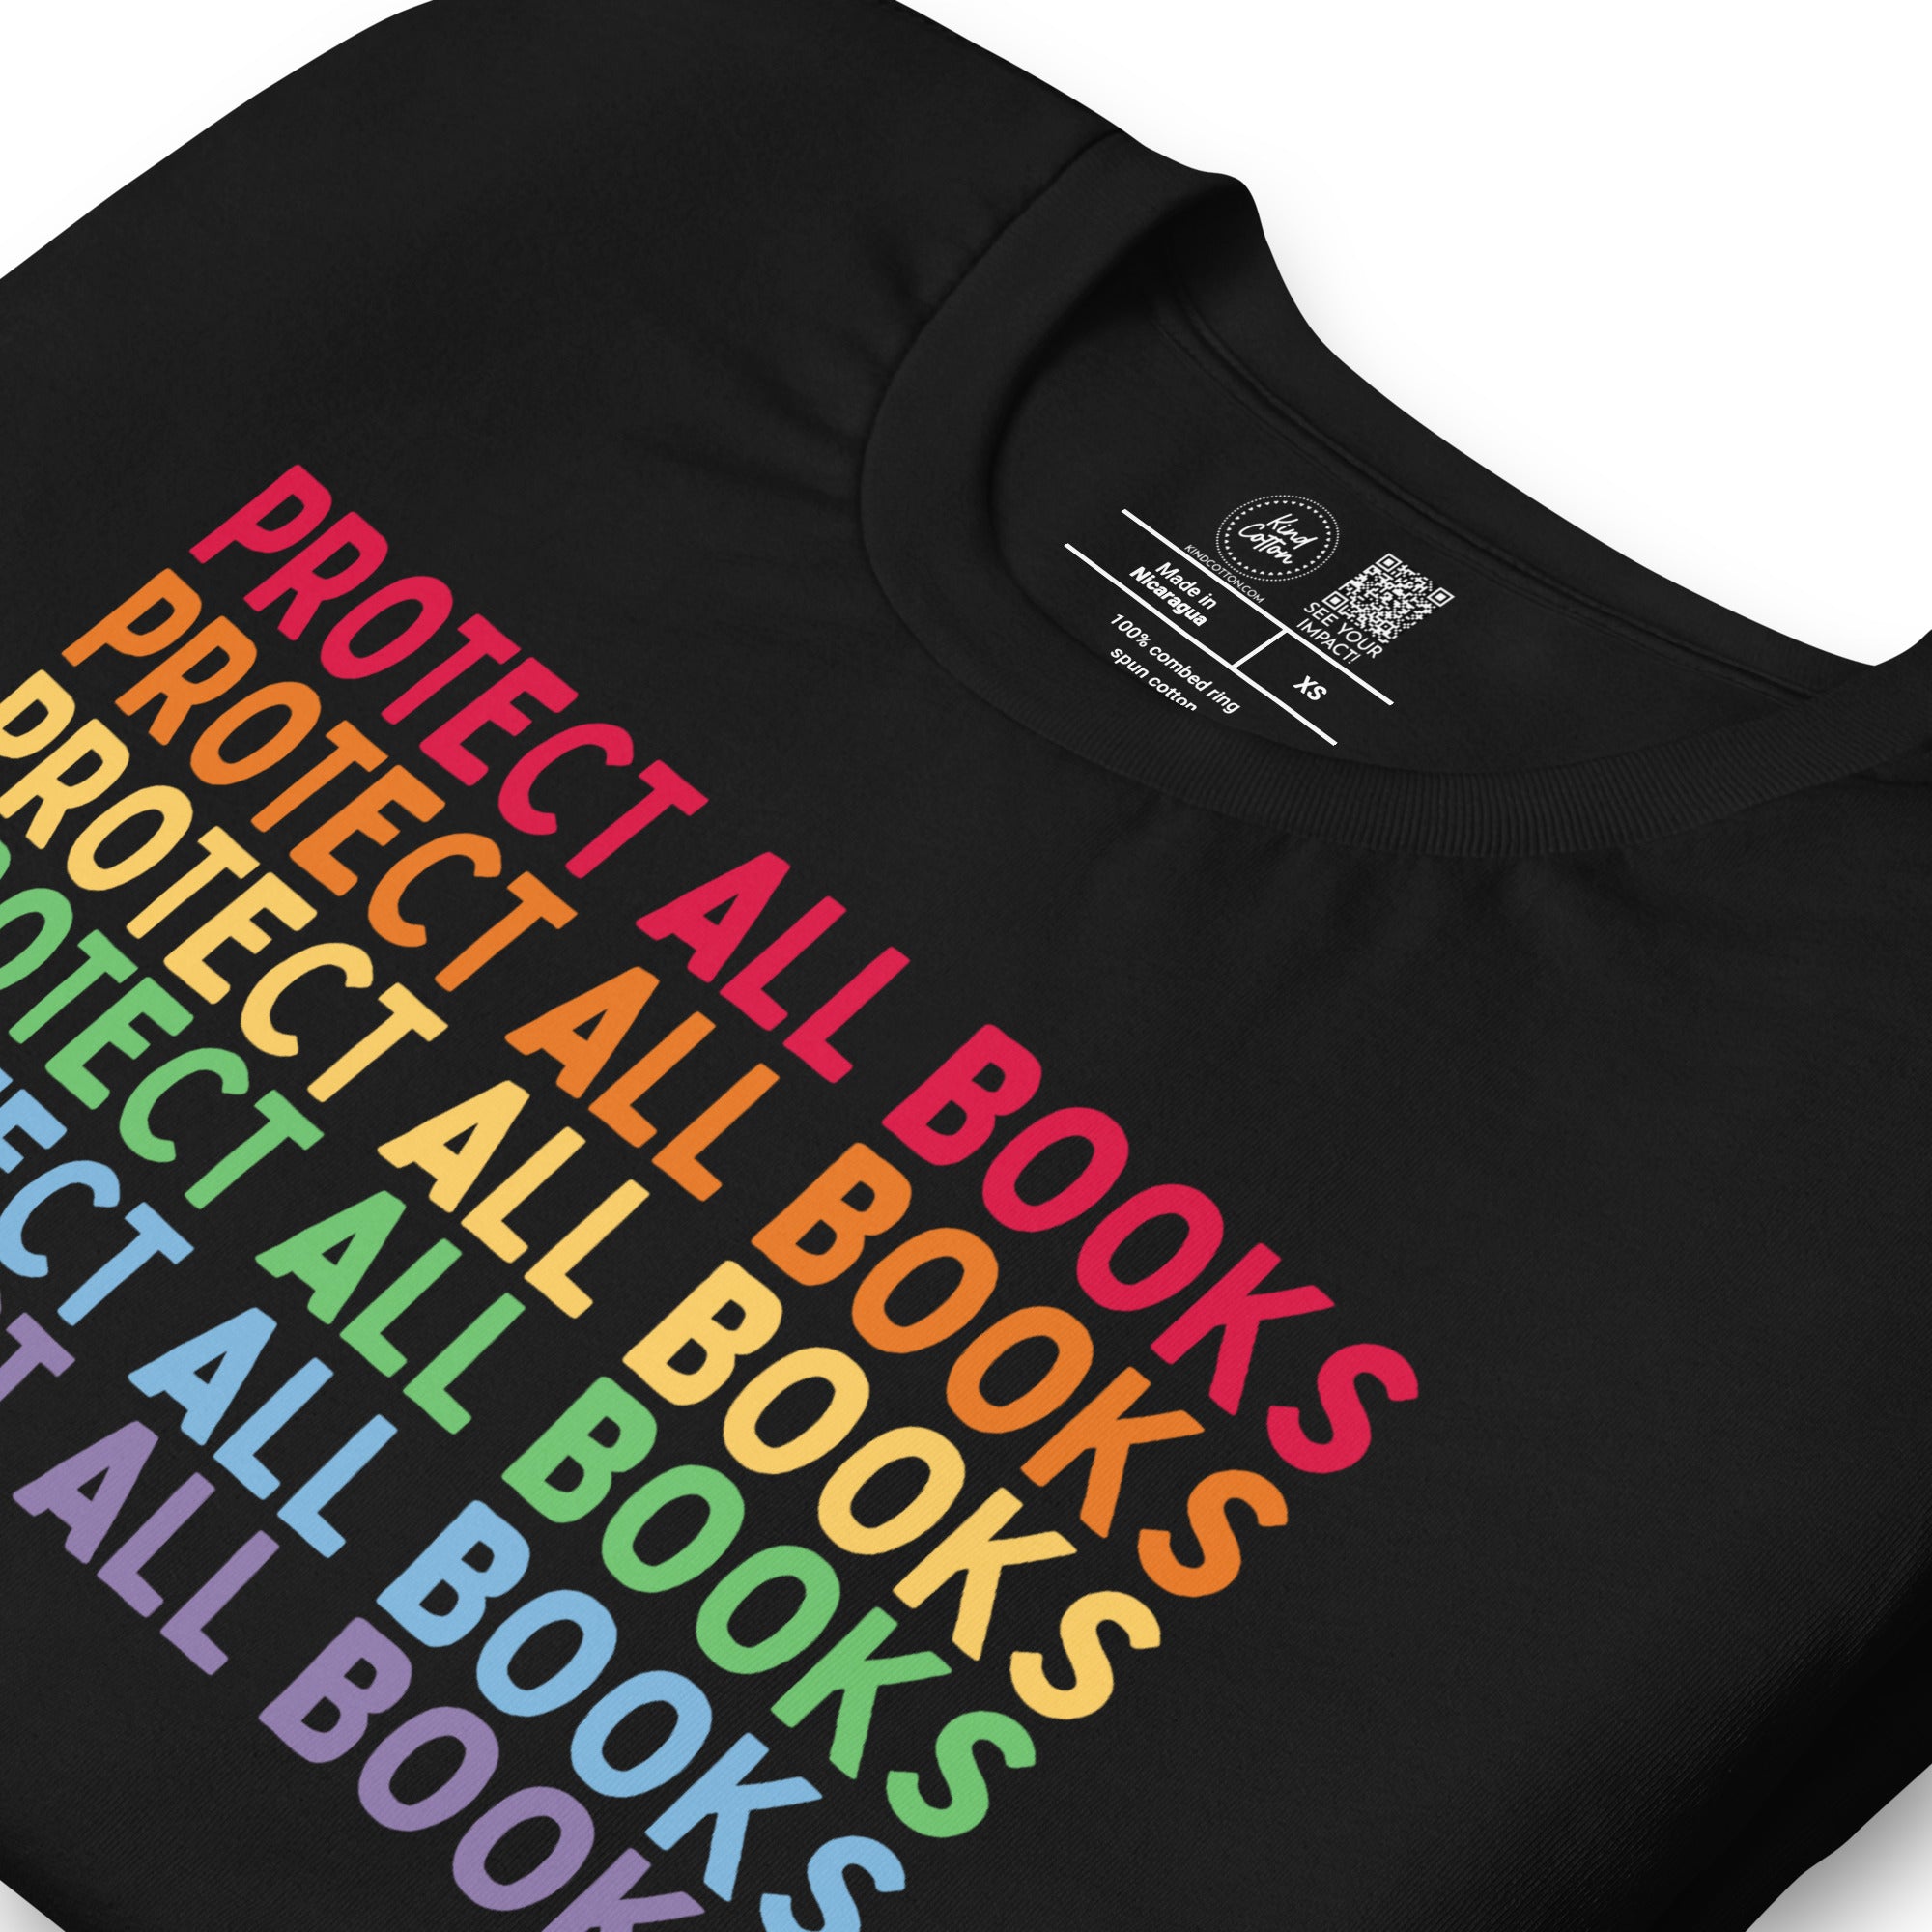 Protect All Books Classic Tee